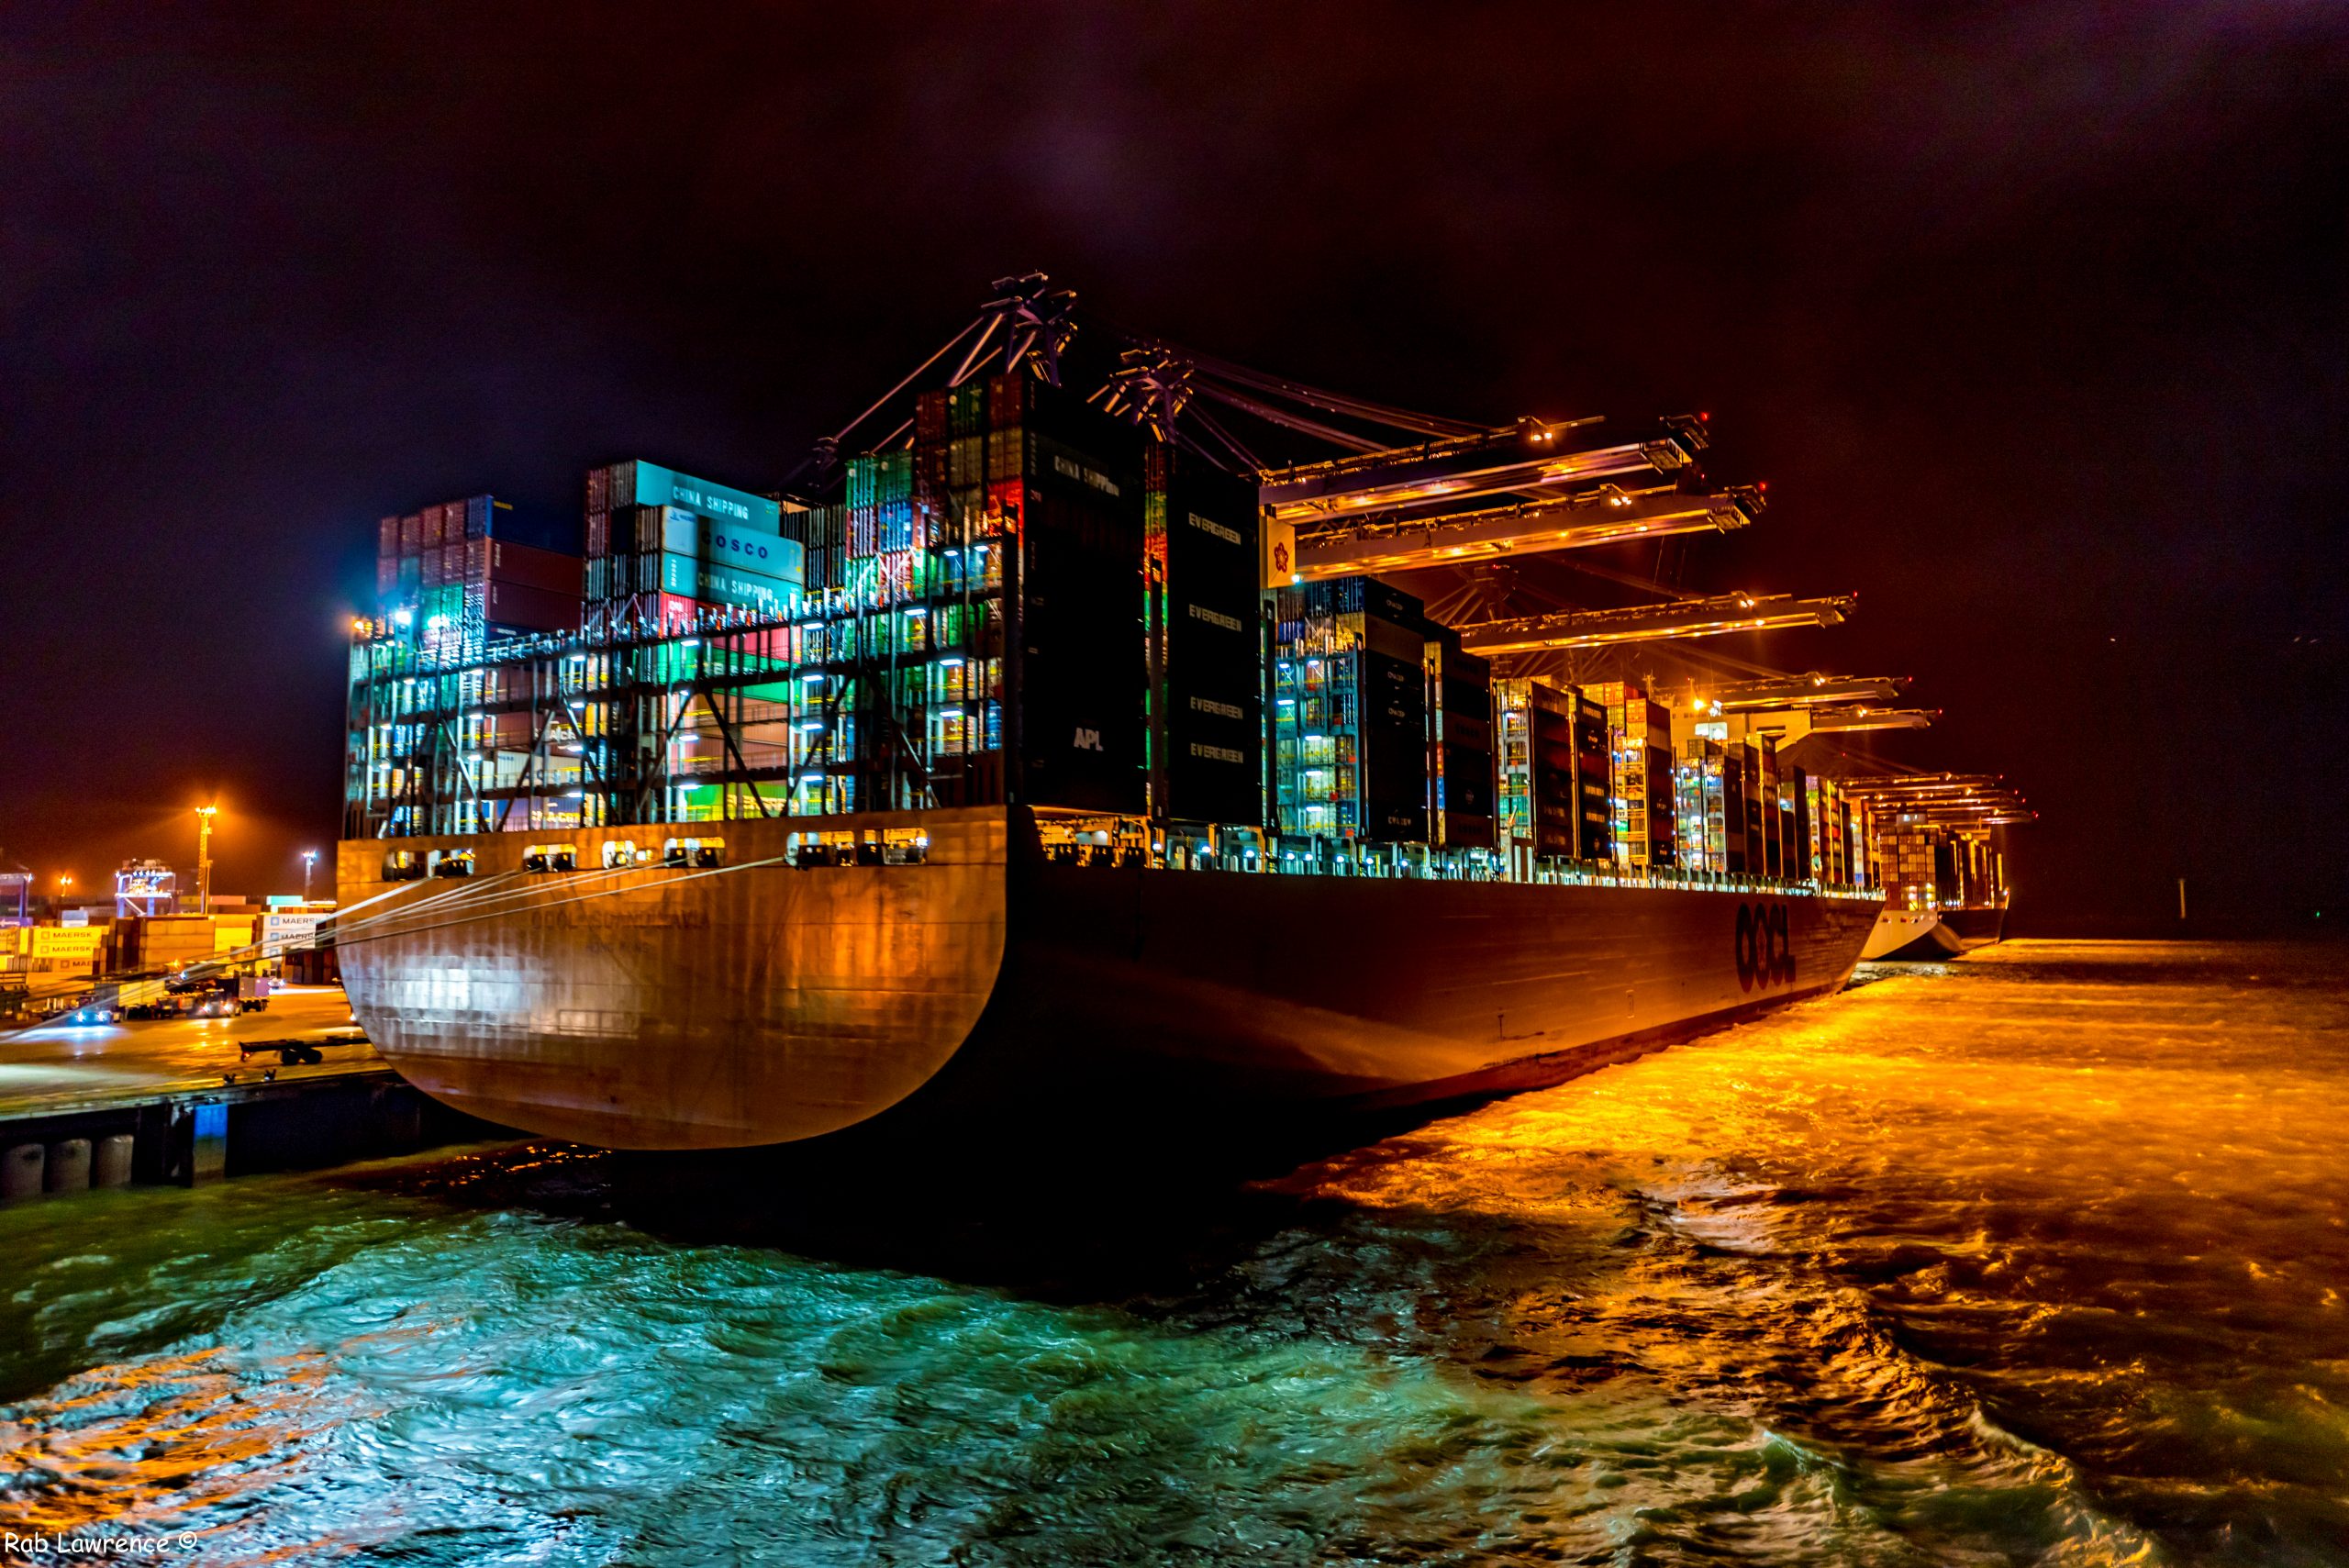 Felixstowe Container Port. copyright: Rab Lawrence/Flickr.